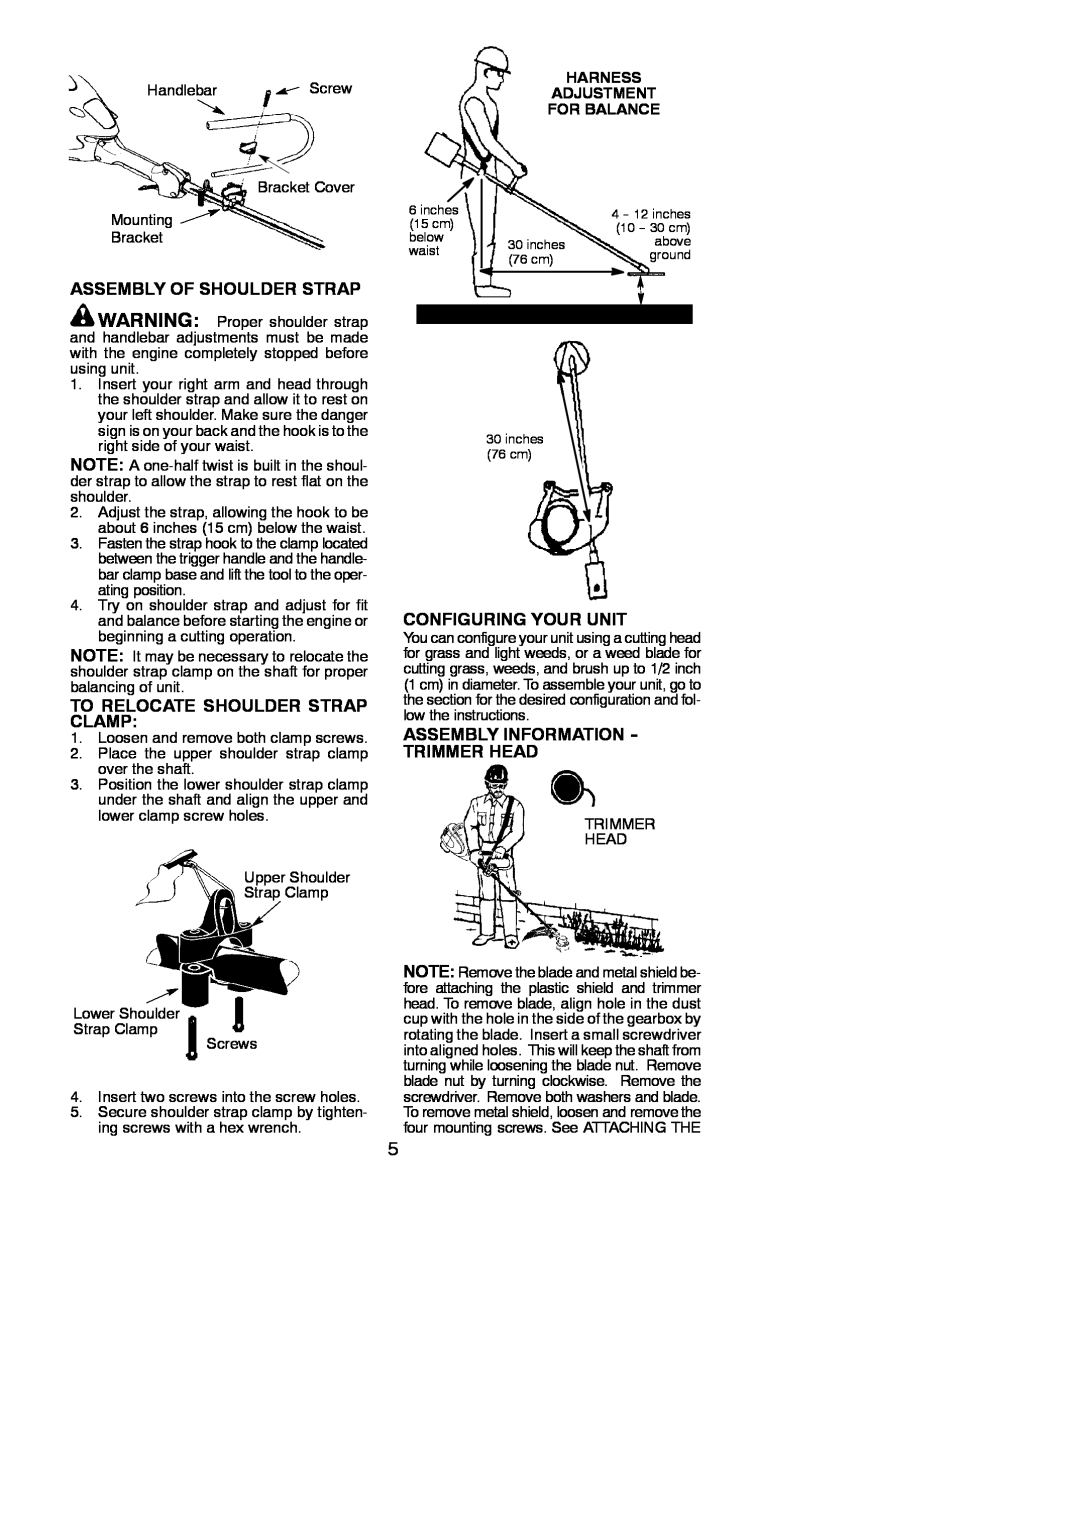 Poulan PP325 instruction manual Assembly Of Shoulder Strap, To Relocate Shoulder Strap Clamp, Configuring Your Unit 